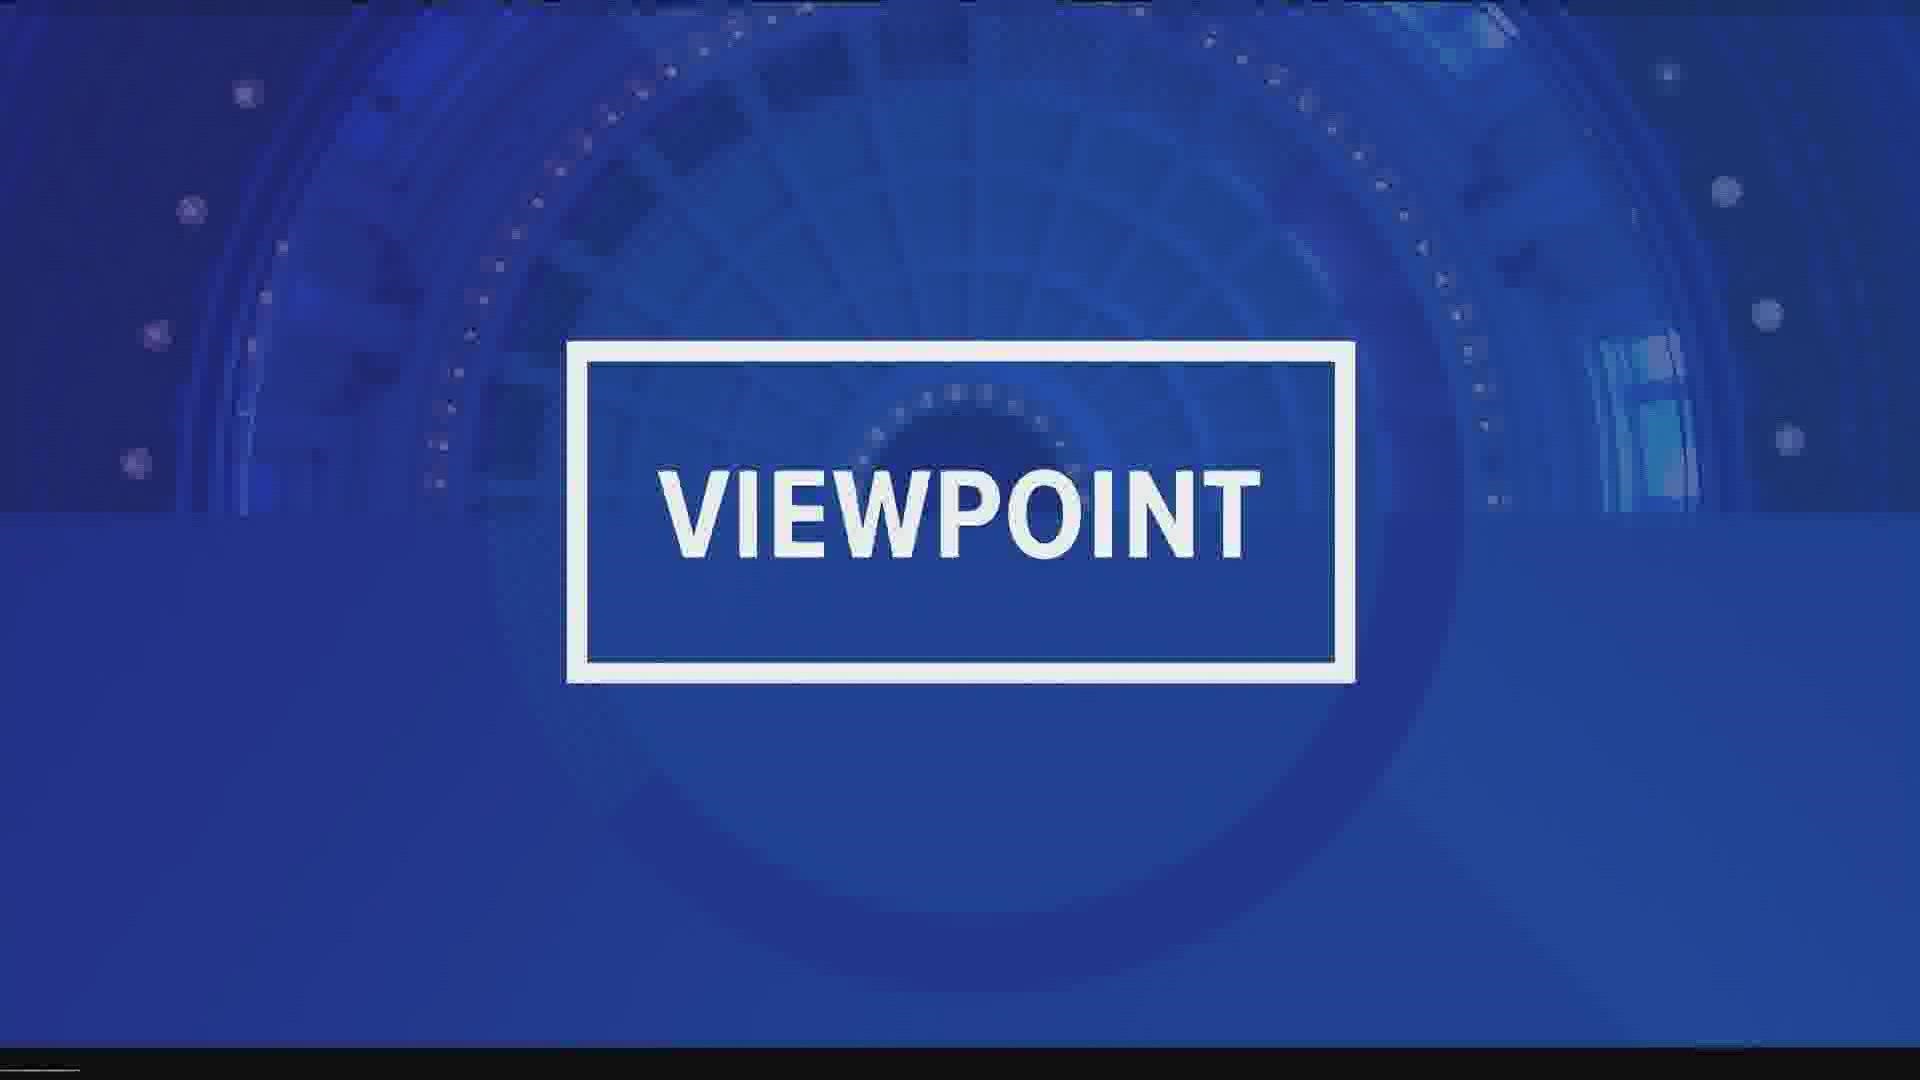 This edition of Viewpoint explores the special enrollment period for those without health insurance, plus the growth of Idaho's Hispanic population.